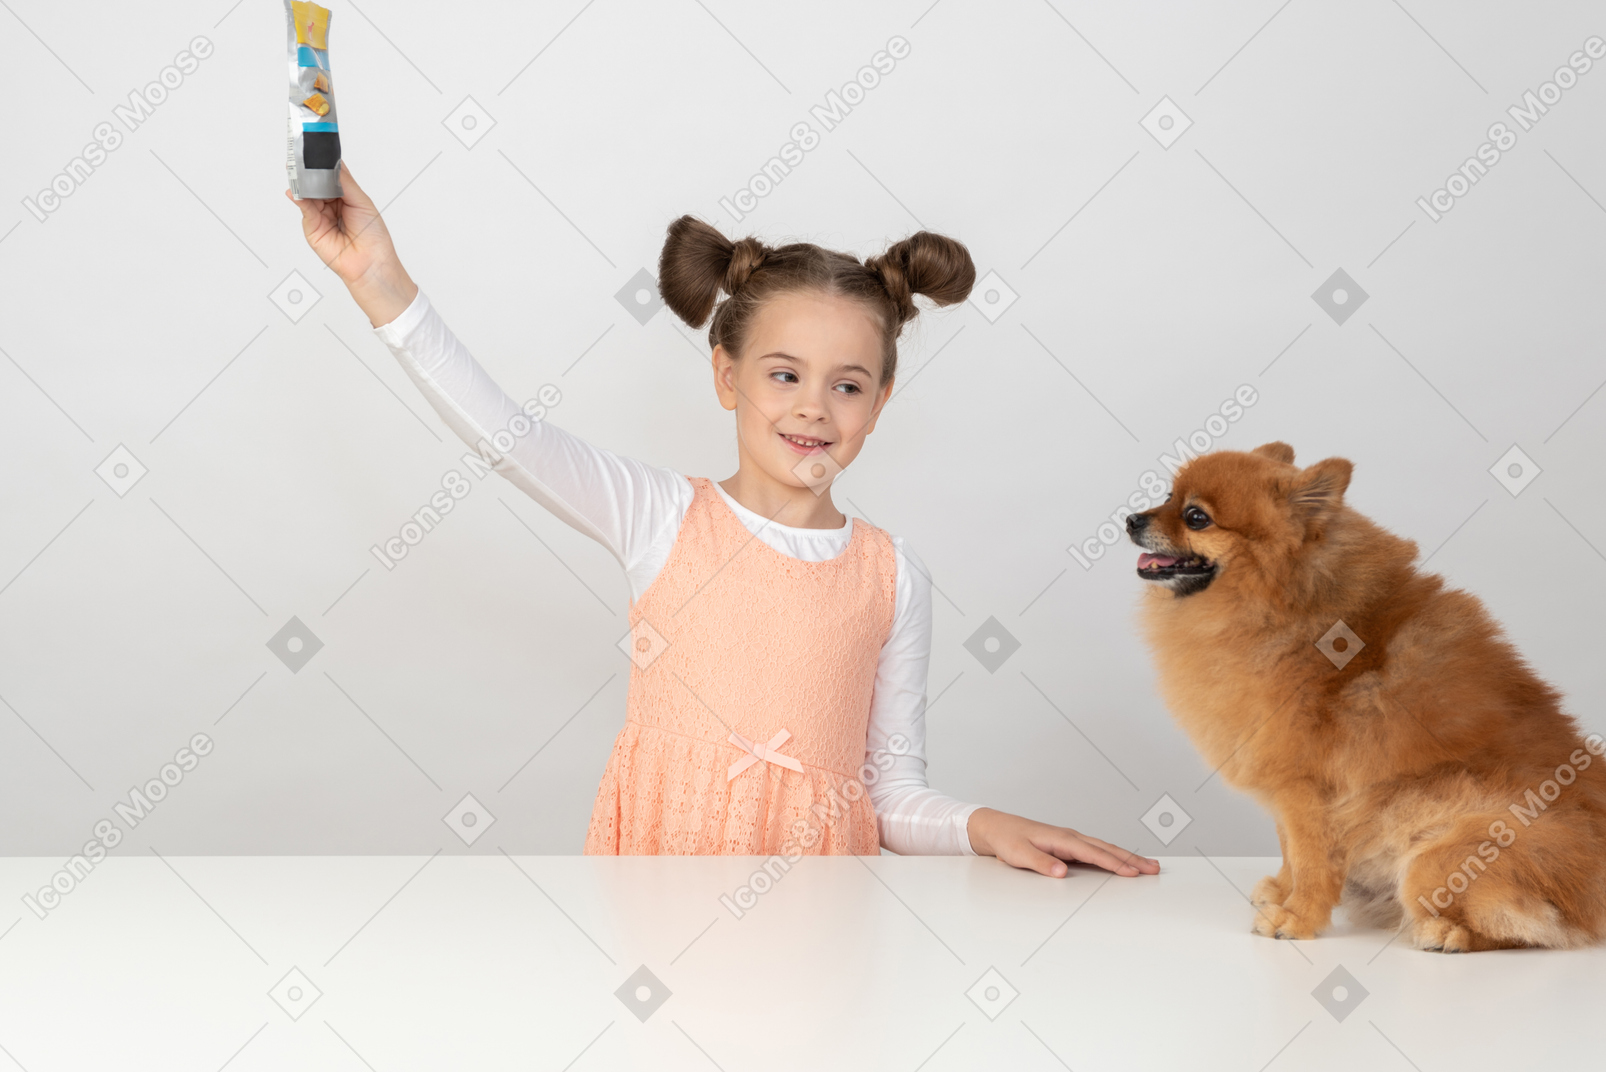 Kid girl showing a packet of dog treat to spitz